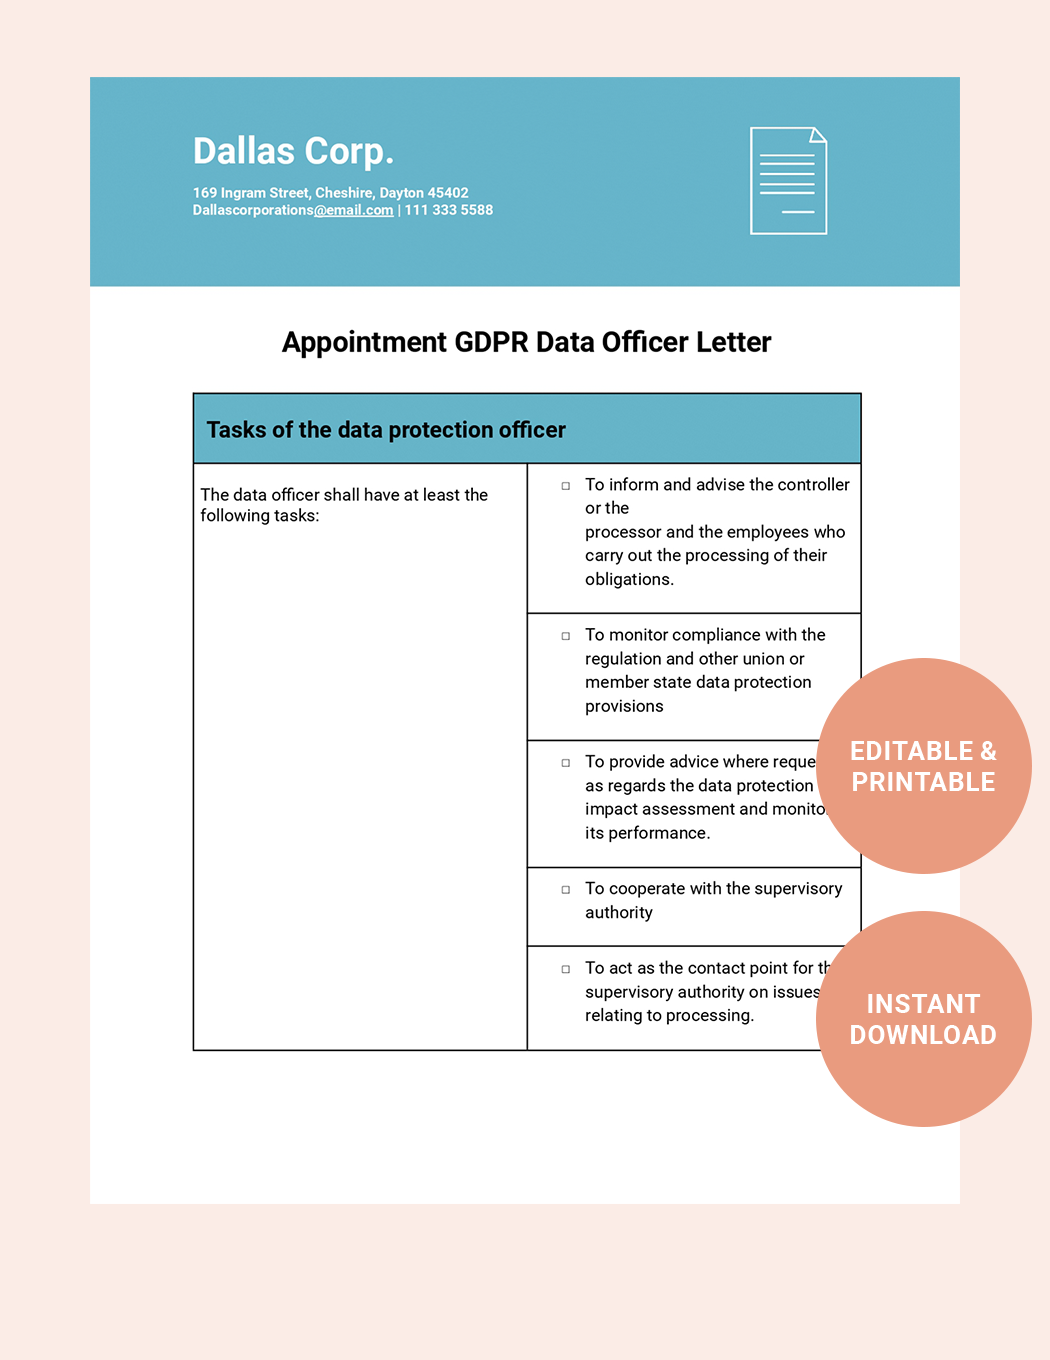 Appointment GDPR Data Officer Letter